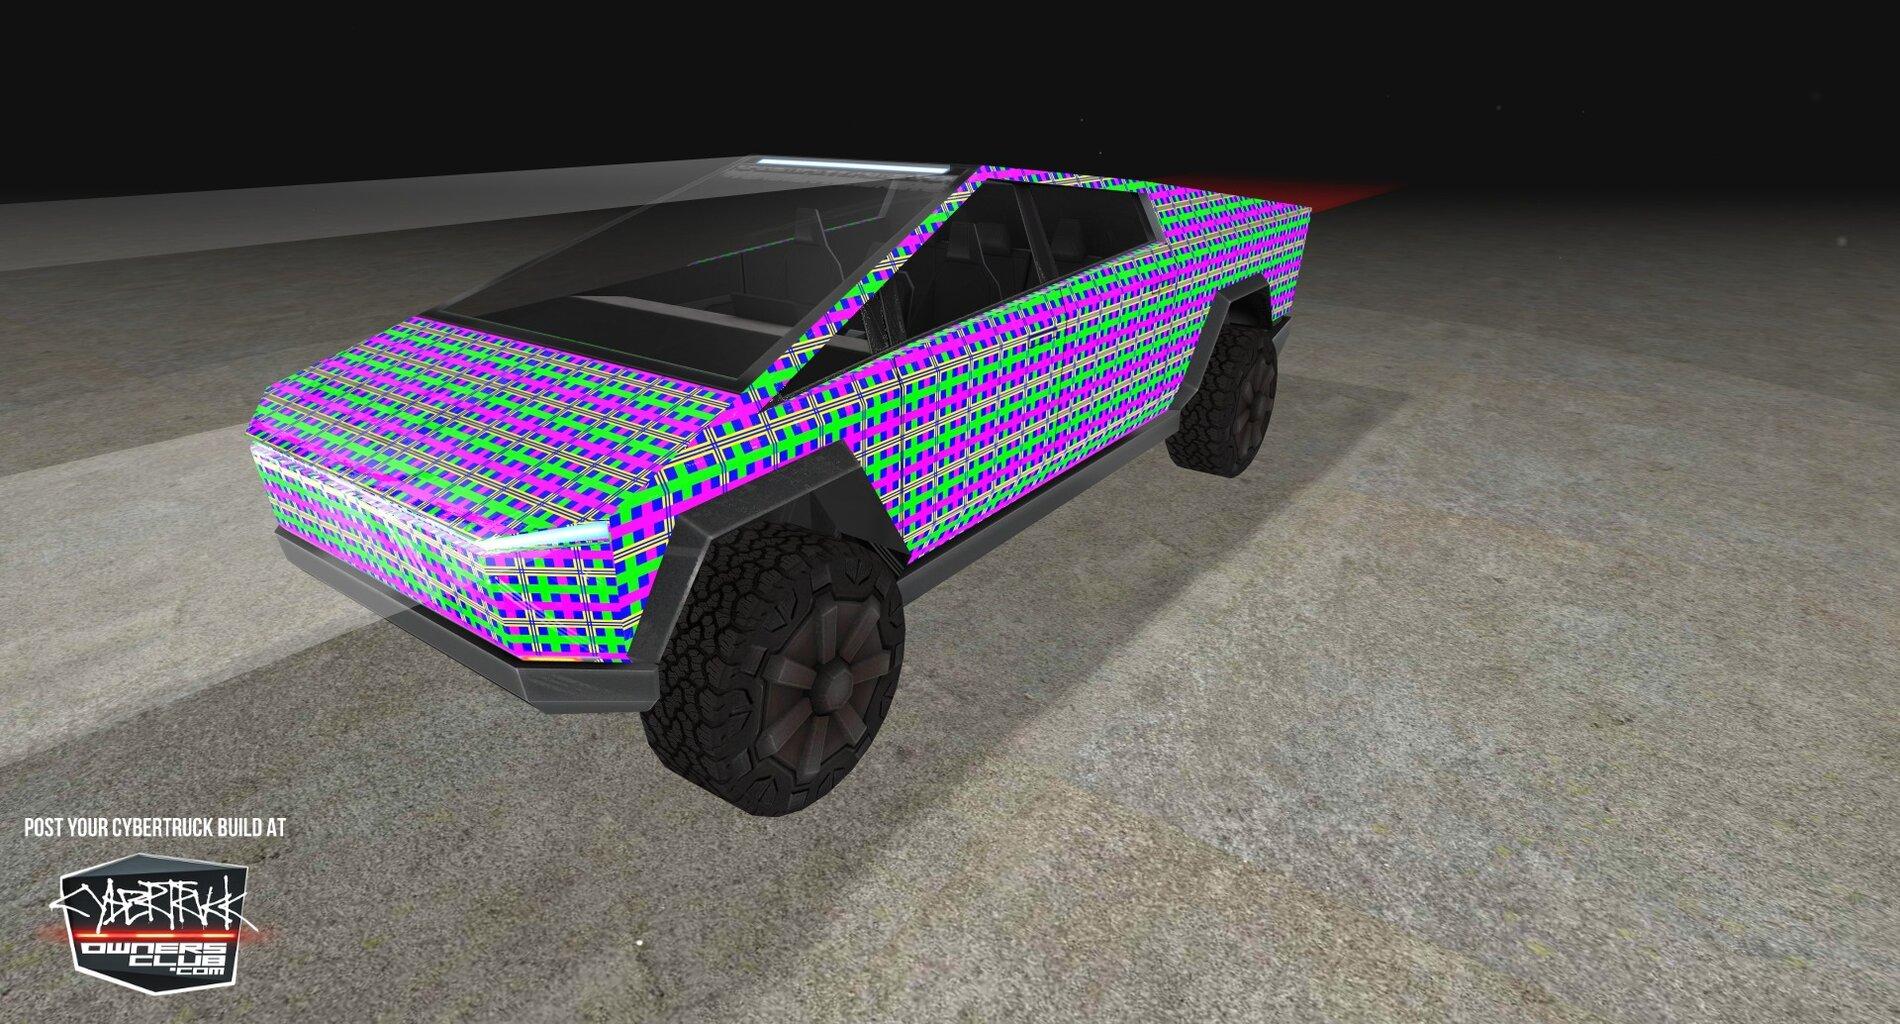 Tesla Cybertruck Build Your Cybertruck With Our 3D Configurator Visualization Tool 🎨 📐 DDCTplaid